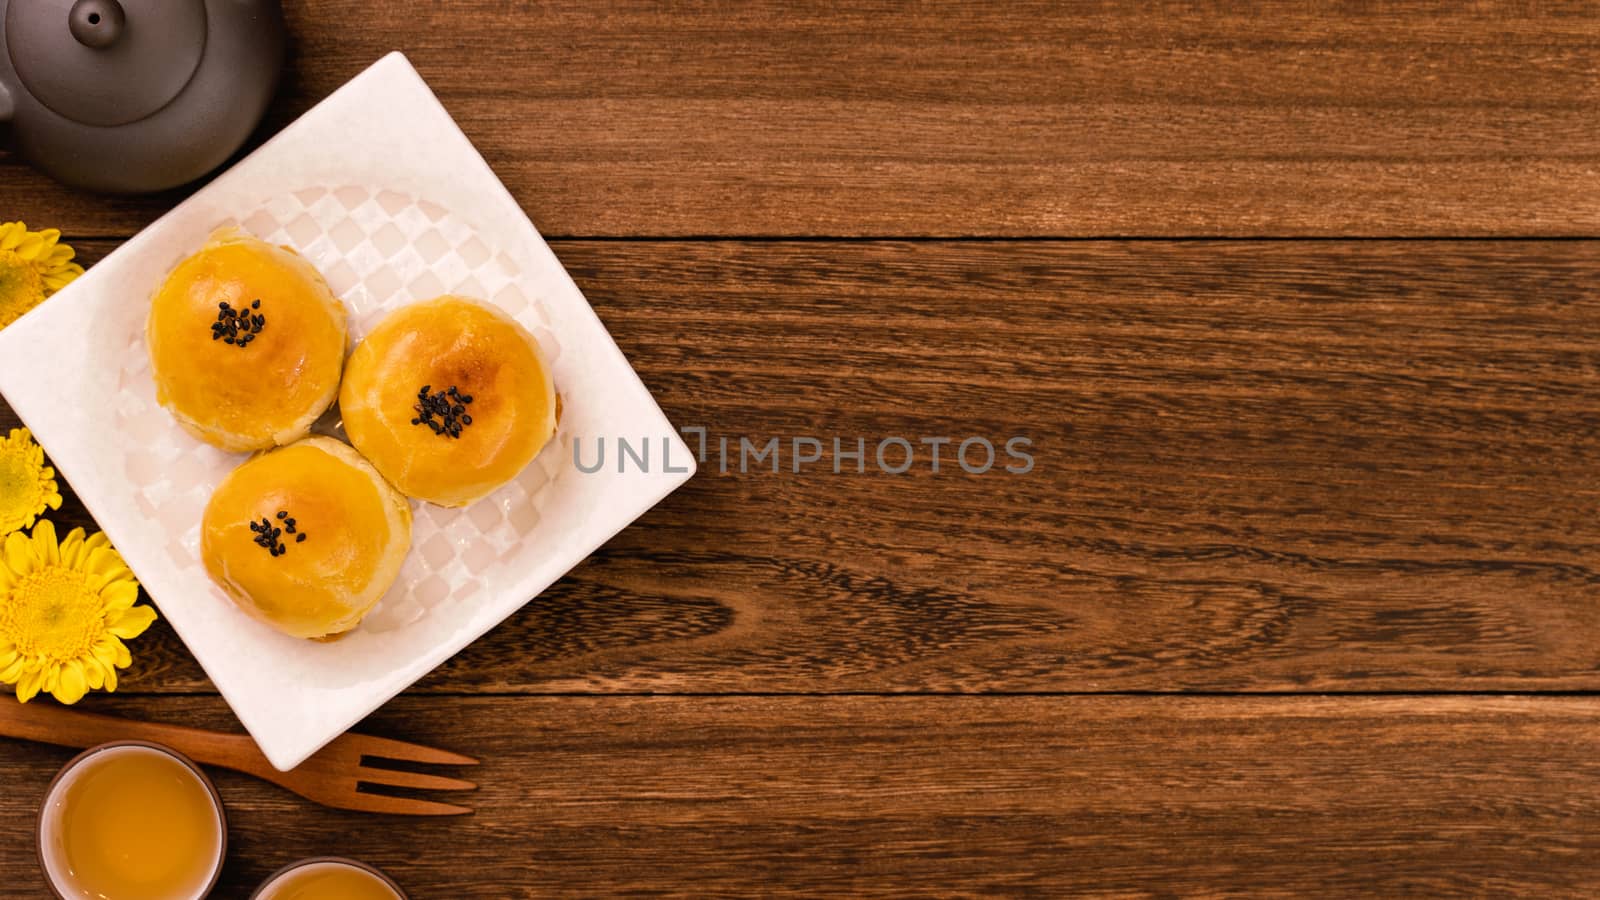 Moon cake for Mid-Autumn Festival, delicious beautiful fresh mooncake on a plate over dark wooden background table, top view, flat lay layout design concept.